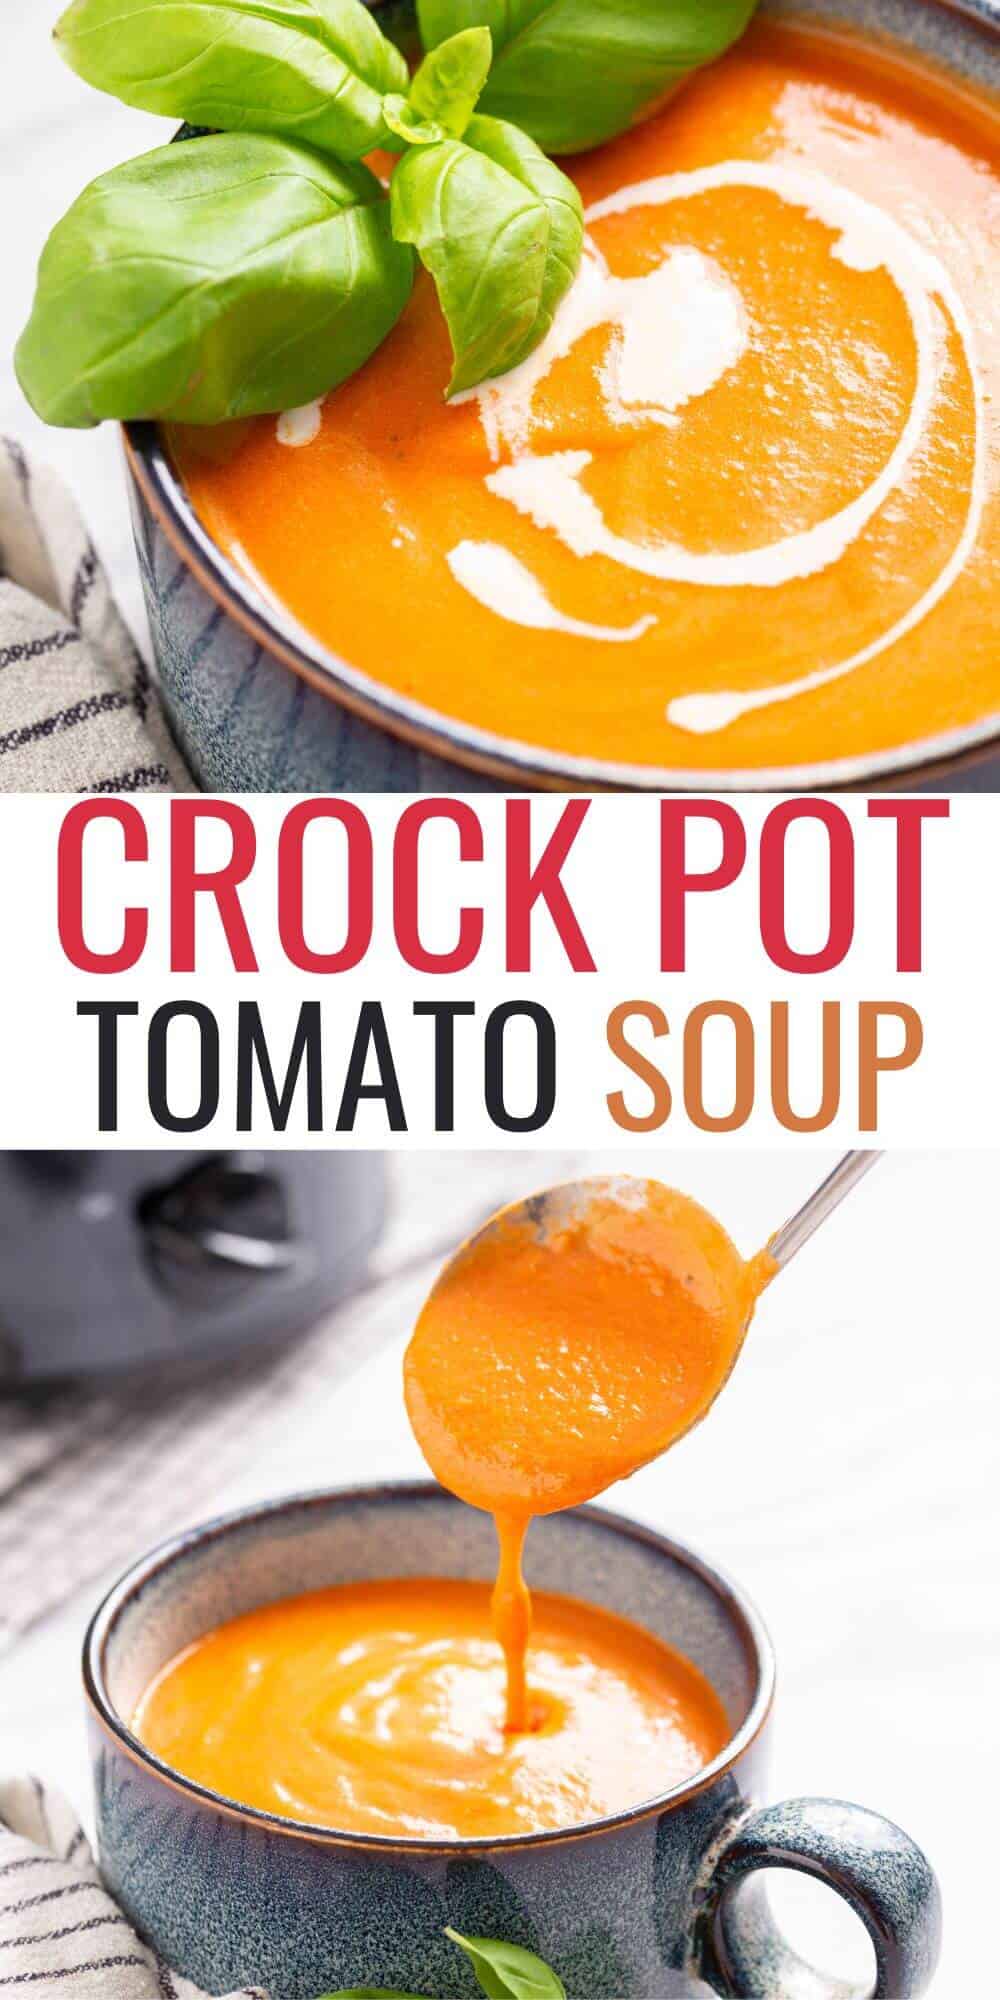 Creamy tomato soup served in a pot garnished with basil, with text overhead "crock pot tomato soup".